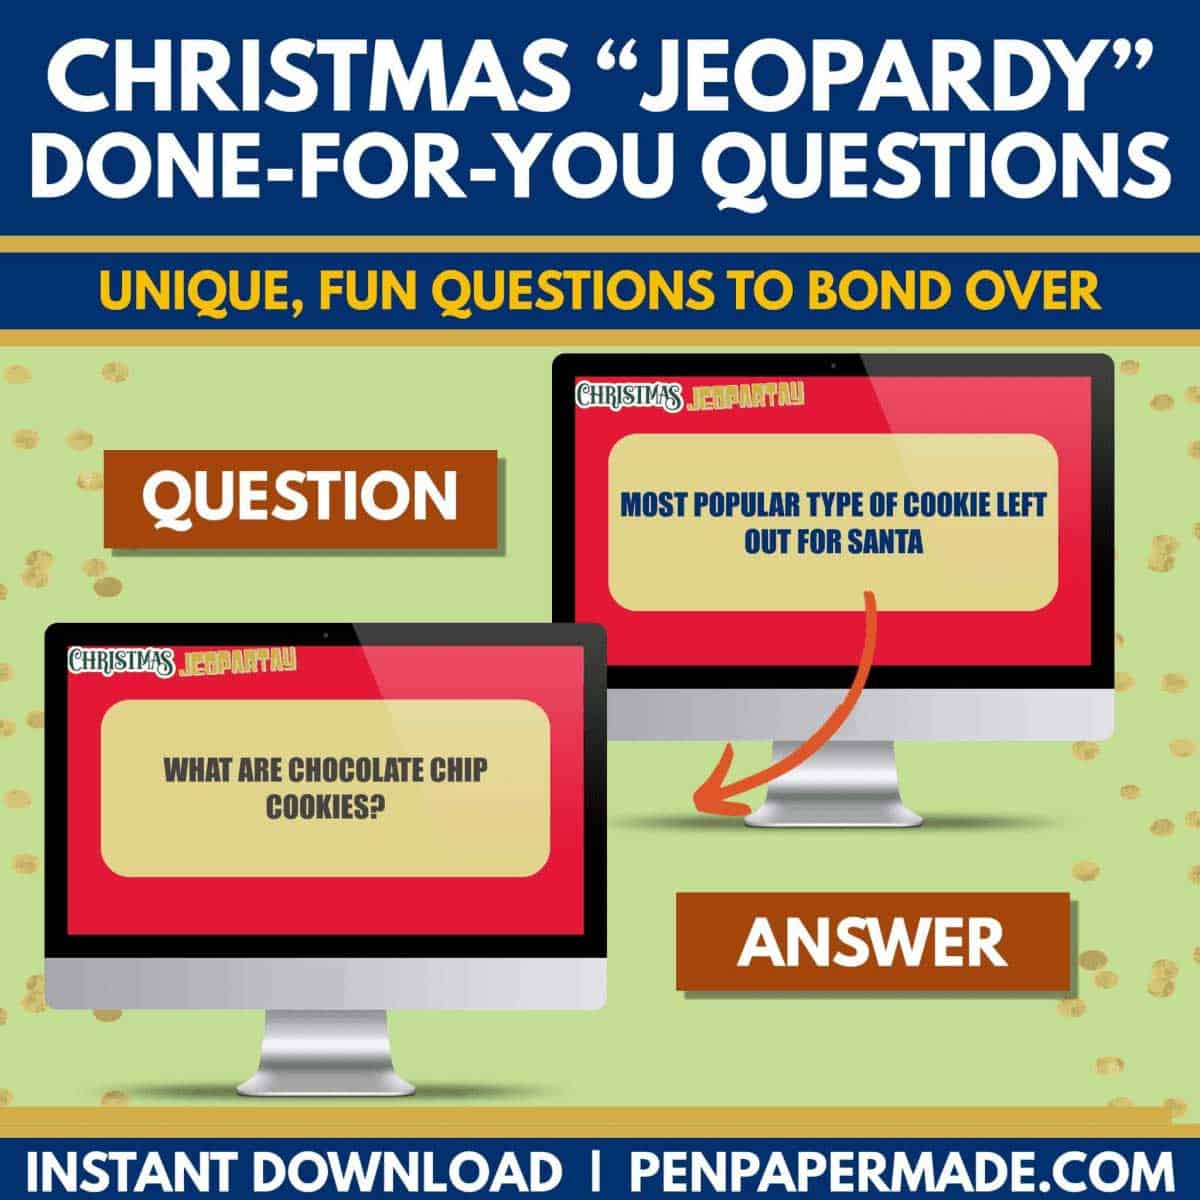 fun christmas jeopardy questions like what's the most popular type of cookie left out for santa?